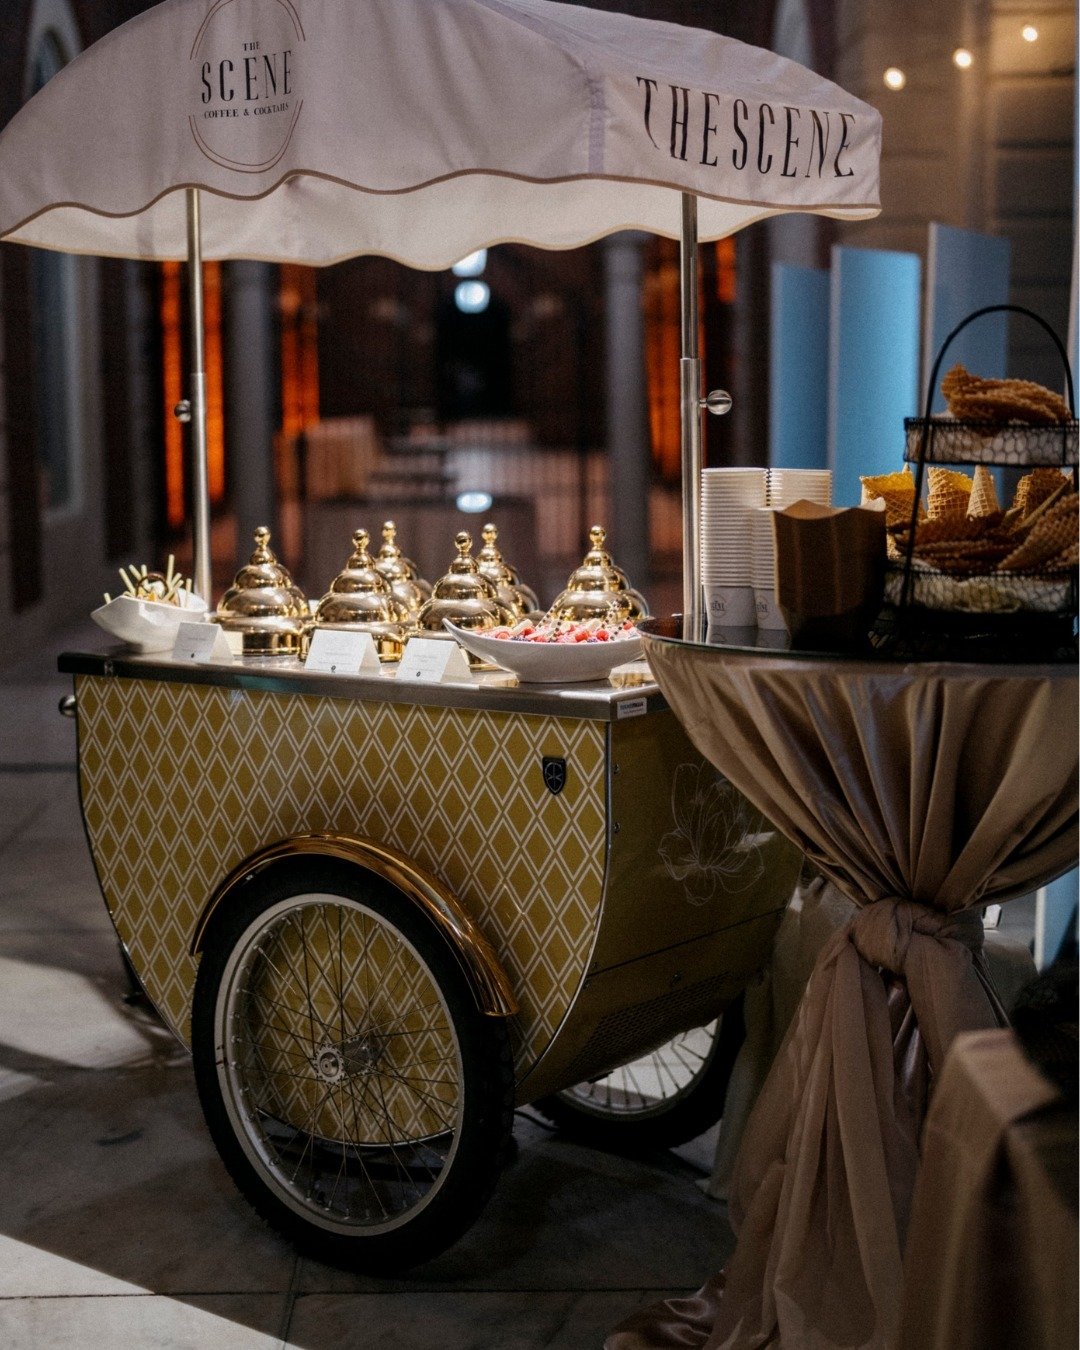 Ready to elevate your event to a new level? Look no further than our gelato cart rental for your wedding or special event! Head to our website, and let's talk about making your event even sweeter! 🍨✨
#thescene #coffeeandcocktails #albanyny #albanyne